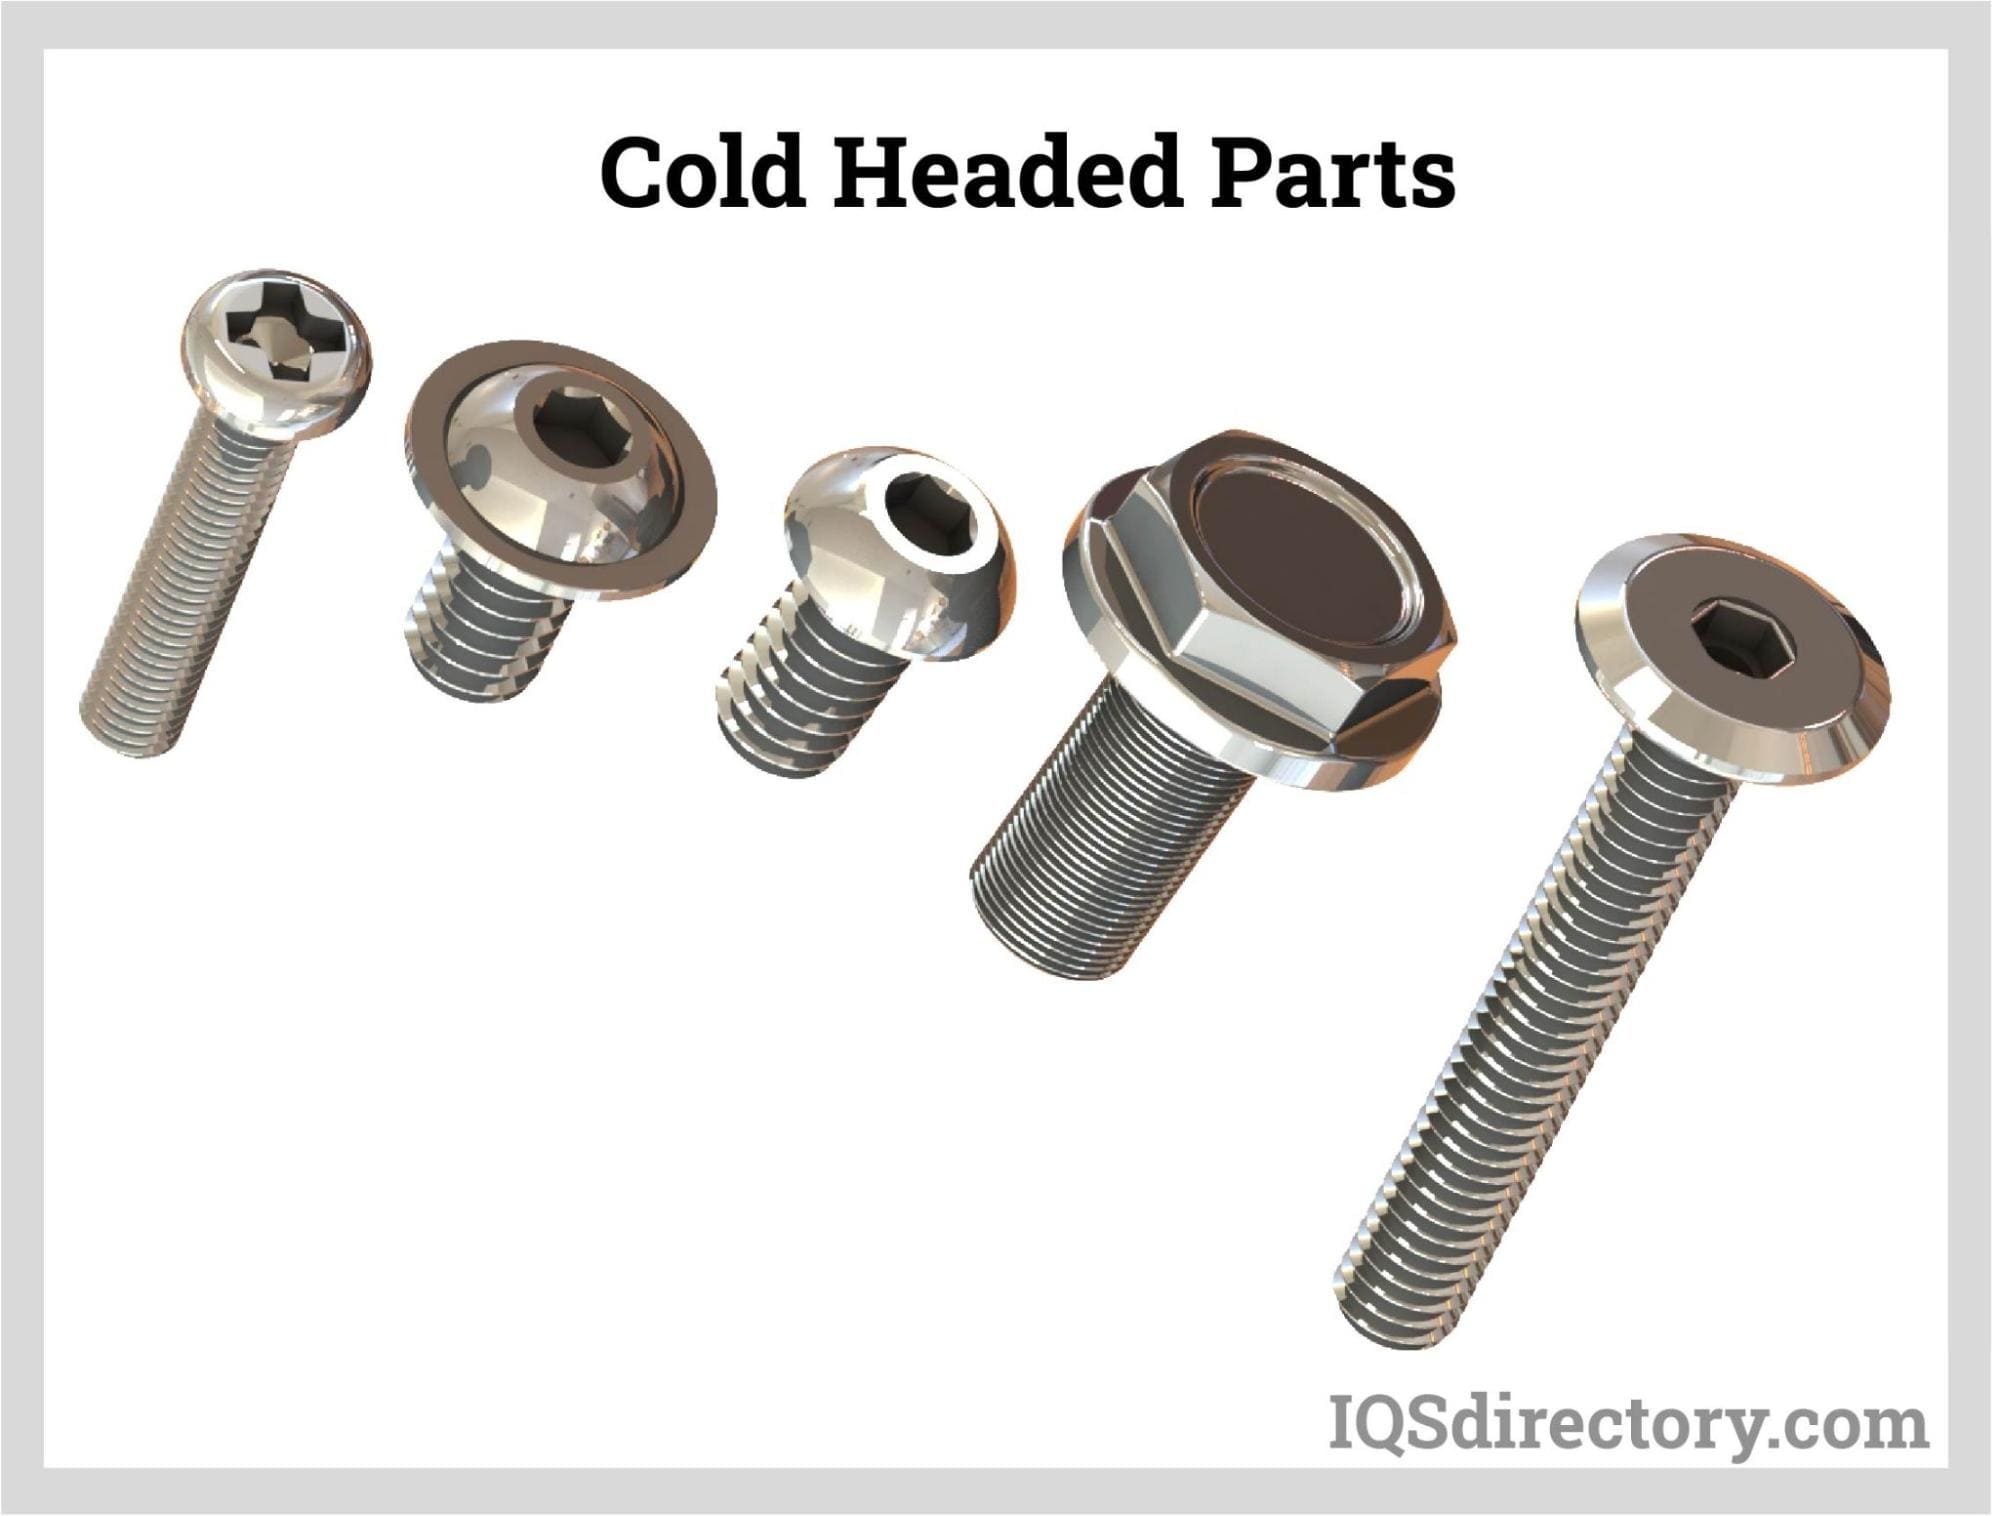 Cold Headed Parts